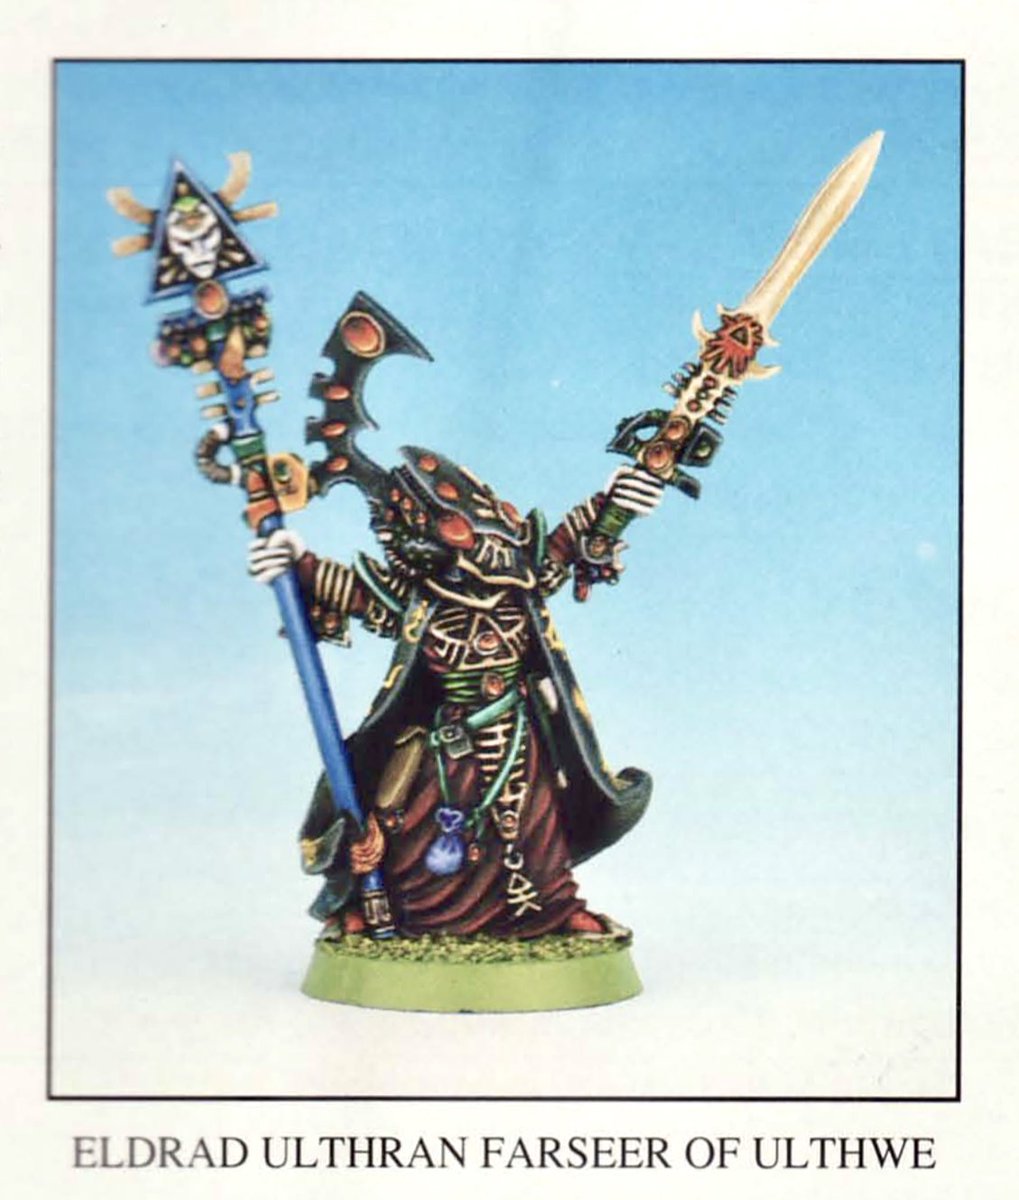 The OG Eldrad ulthran miniature. I think this is fantastic although I never had one myself. How about you guys? Did any of you have him?
.
#oldhammer #aeldari #warhammercommunity #warhammer40k #40k